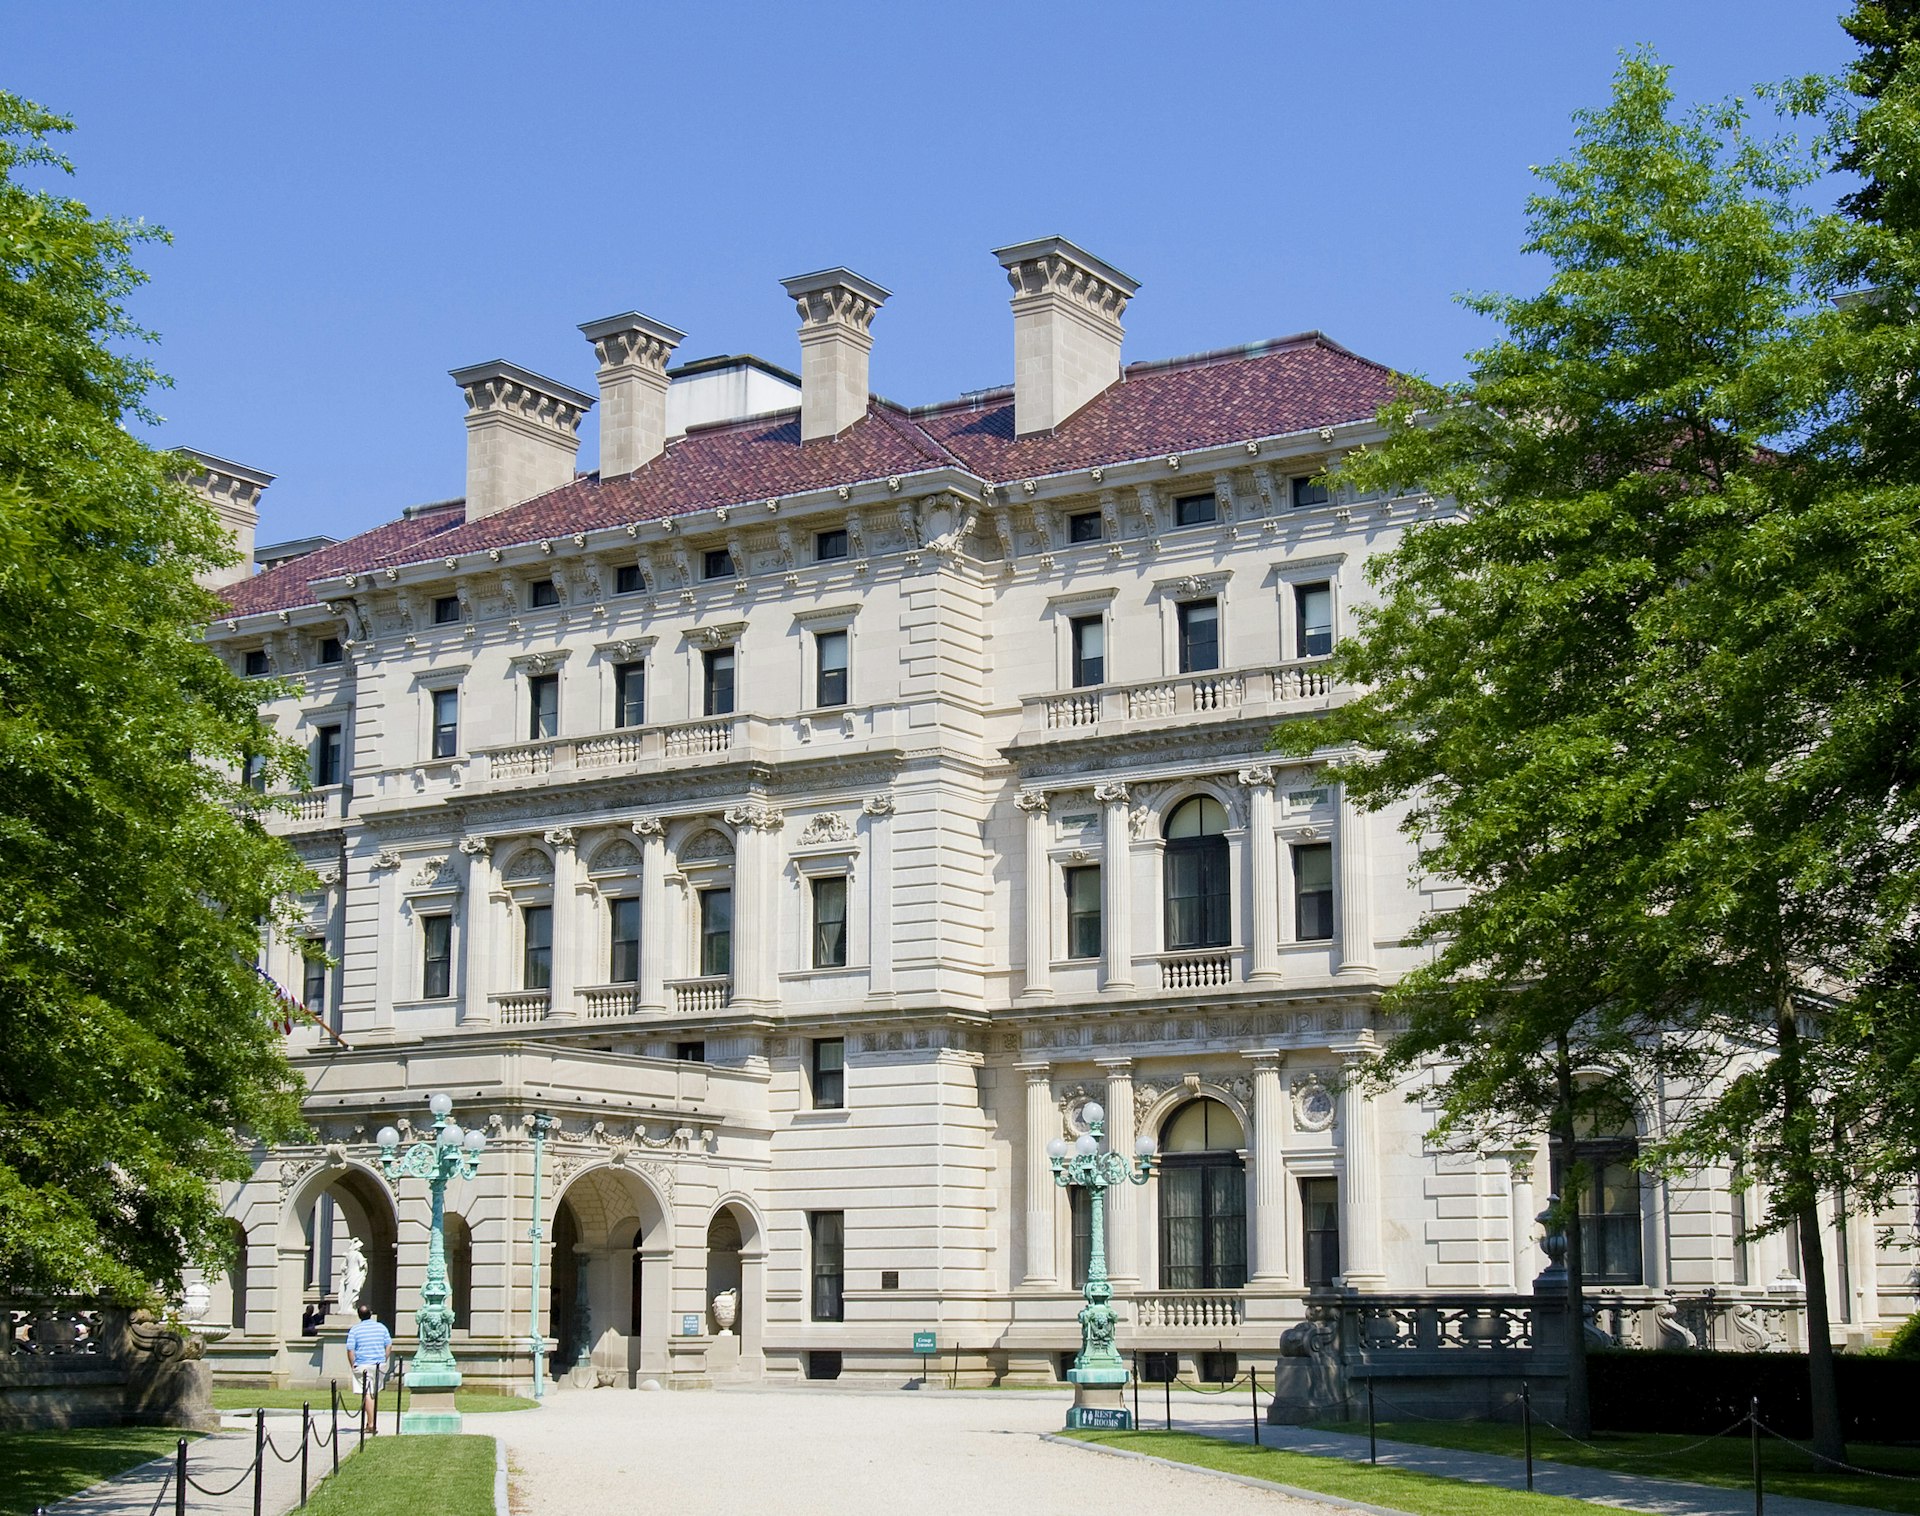 Exterior view of the Breakers Mansion on a sunny day